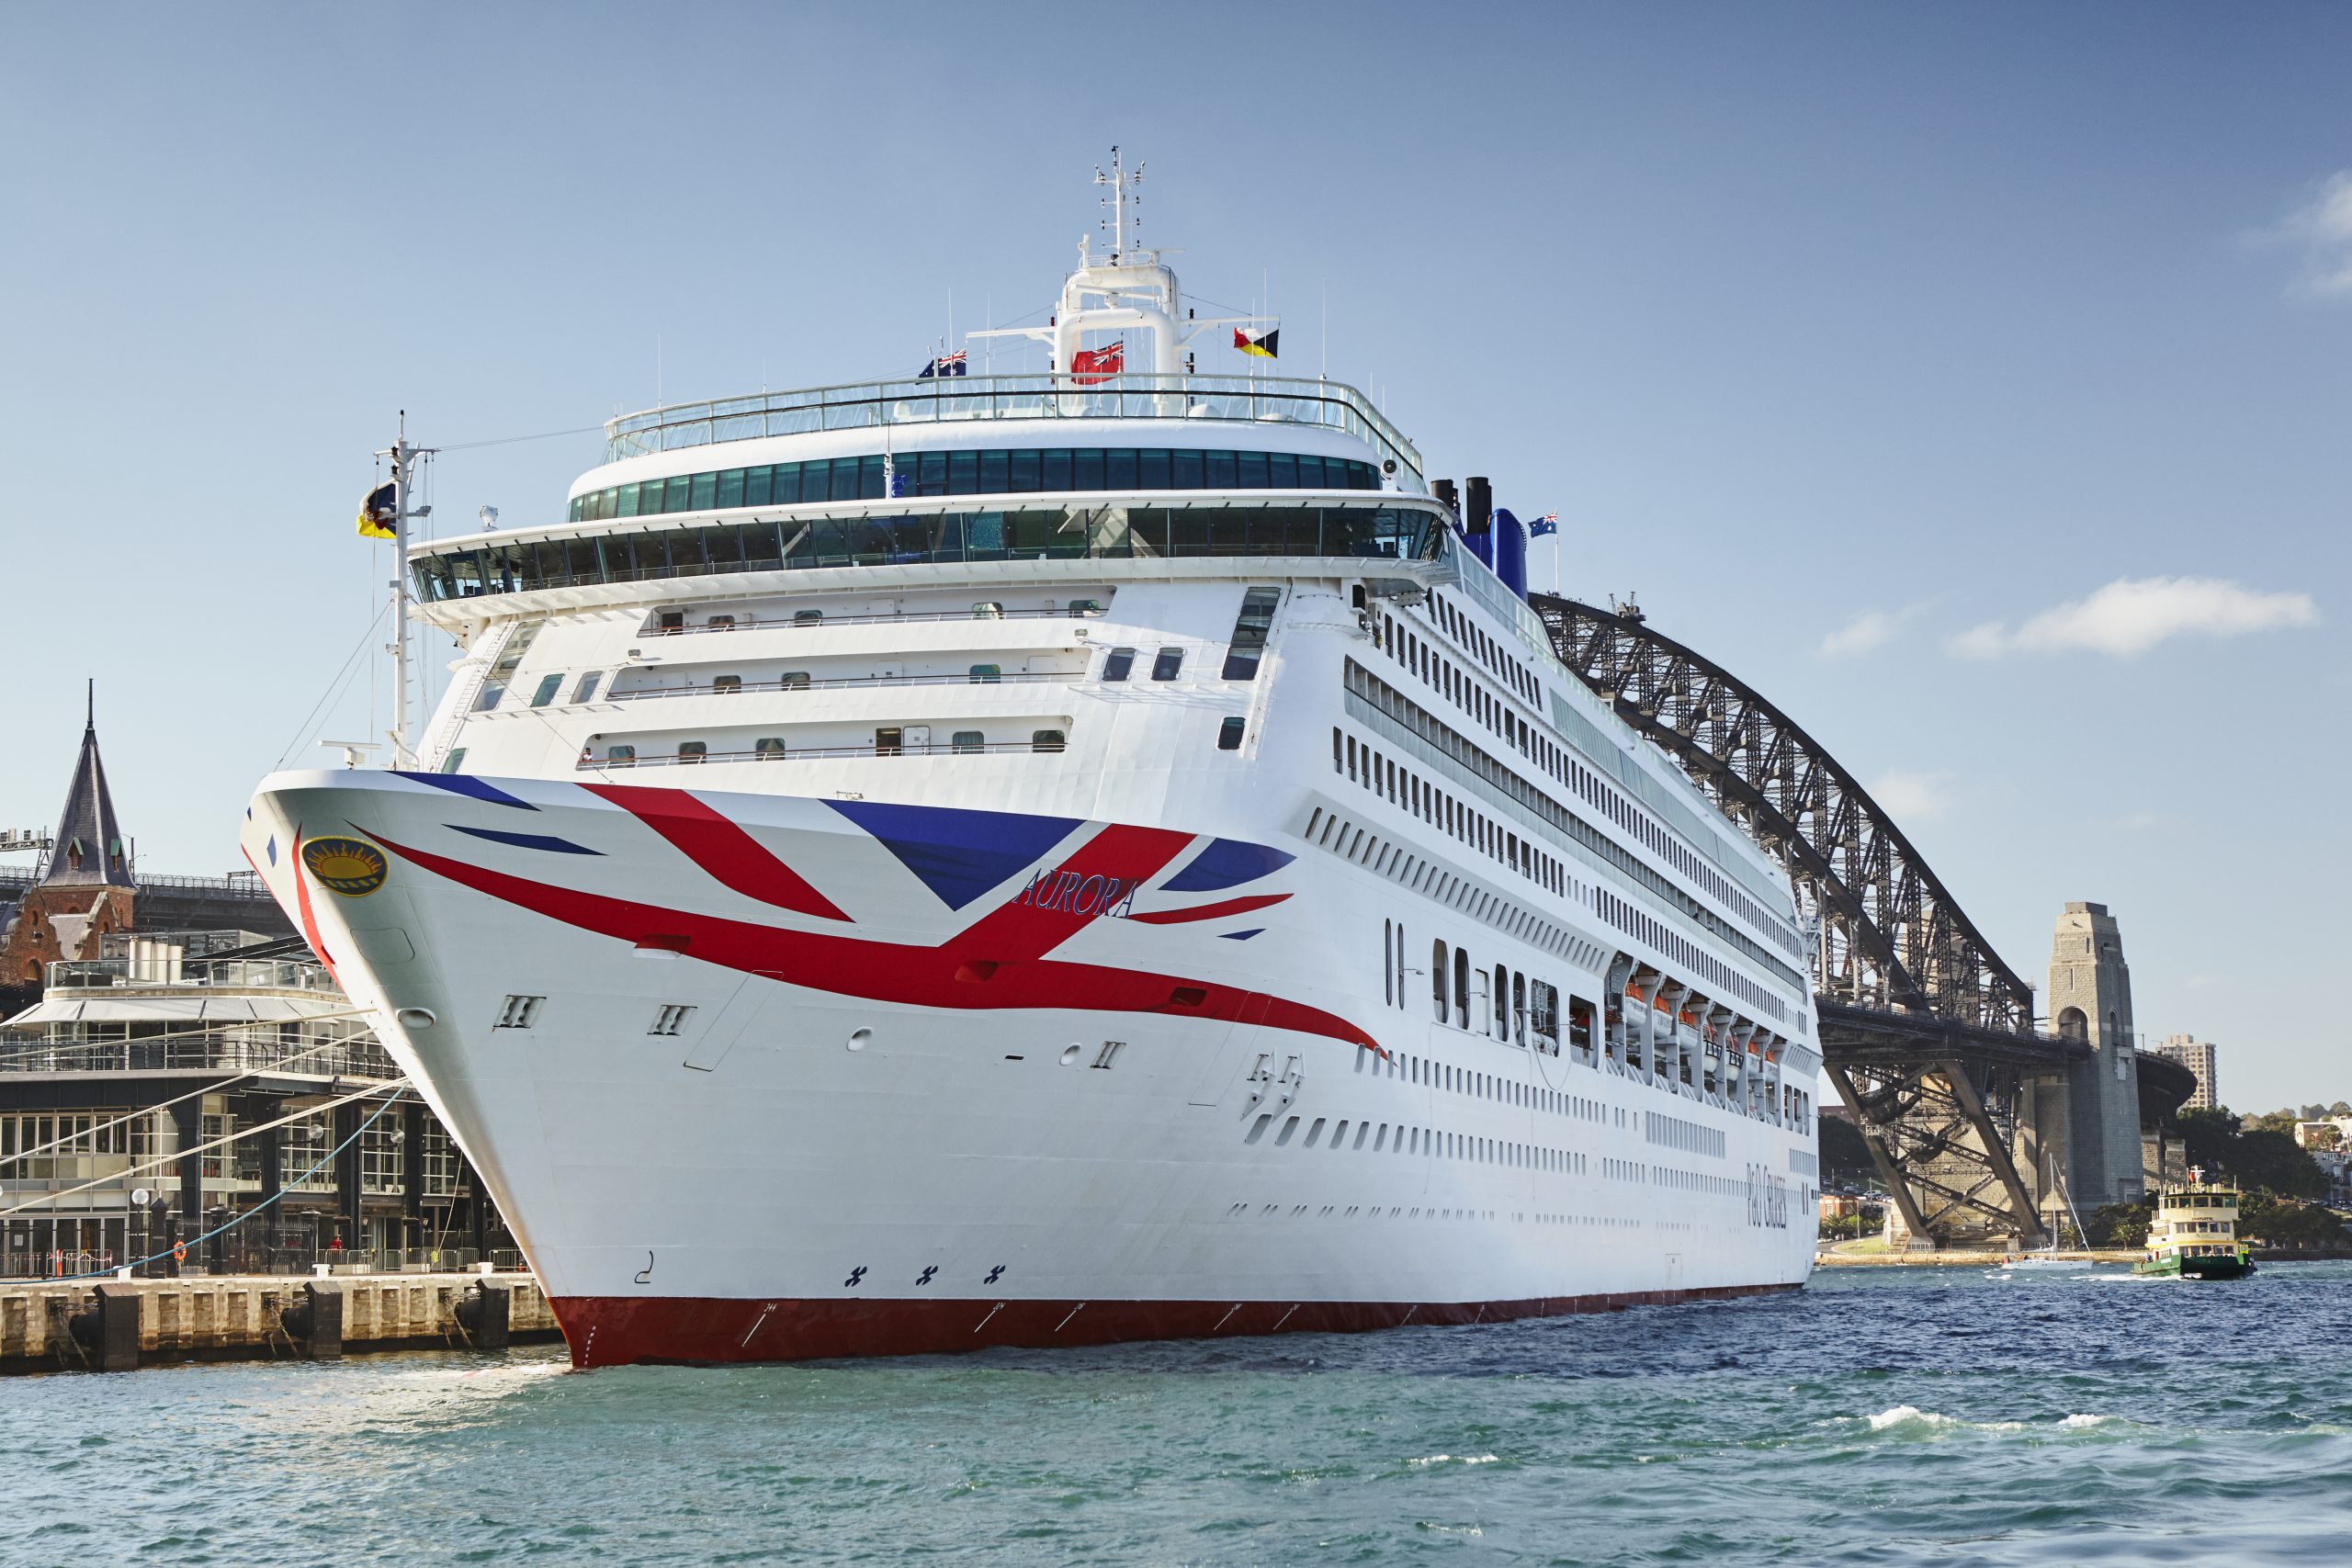 p and o cruises extras